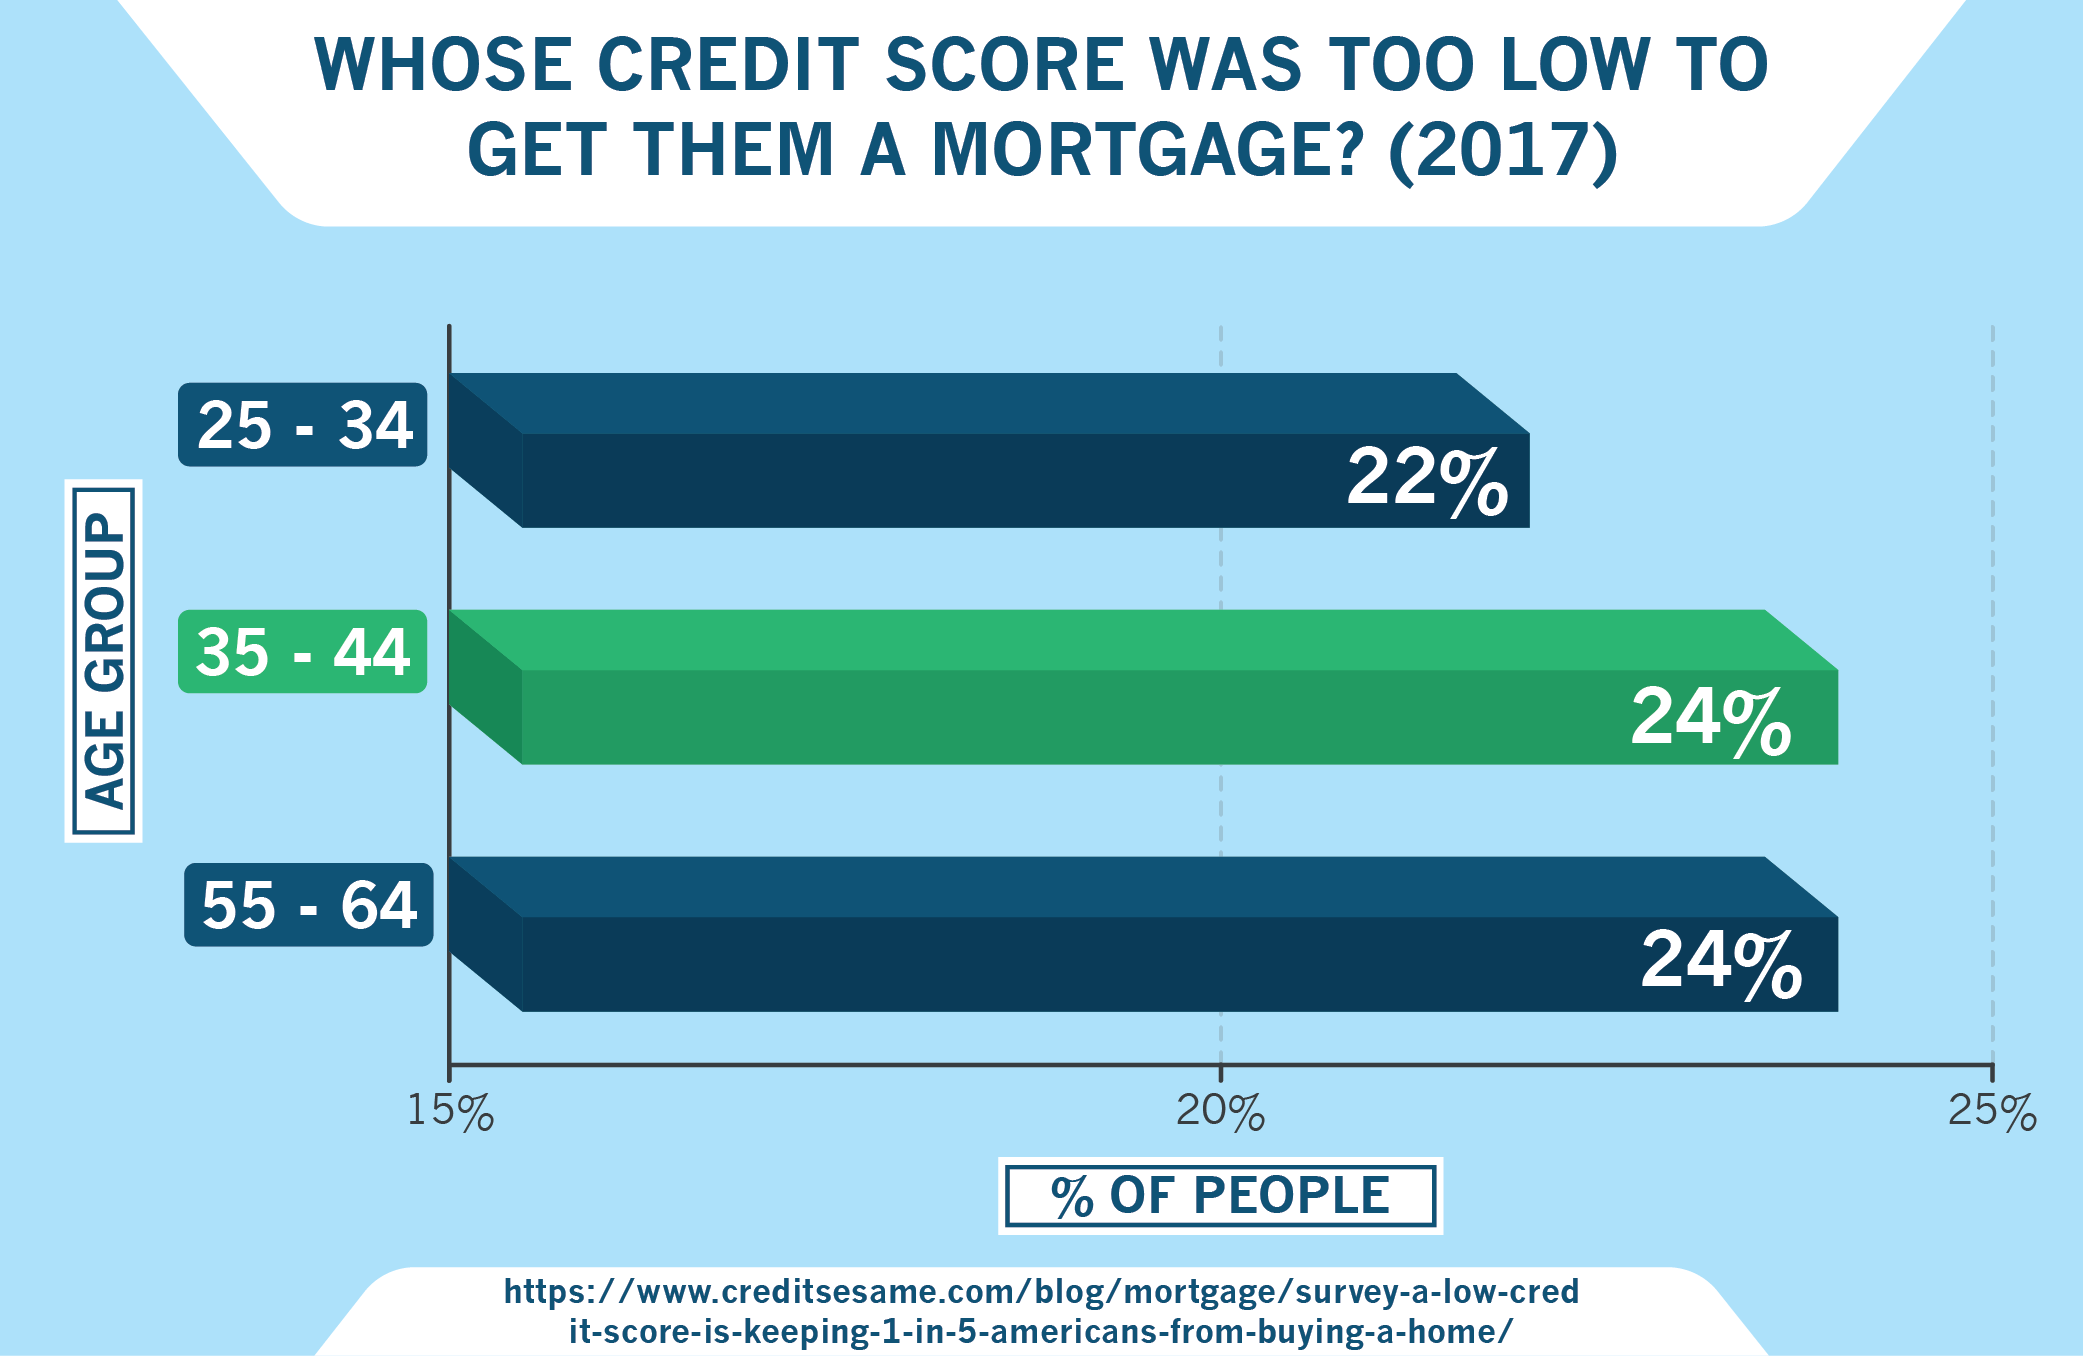 Survey: Whose Credit Score Was Too Low to Get Them a Mortgage?